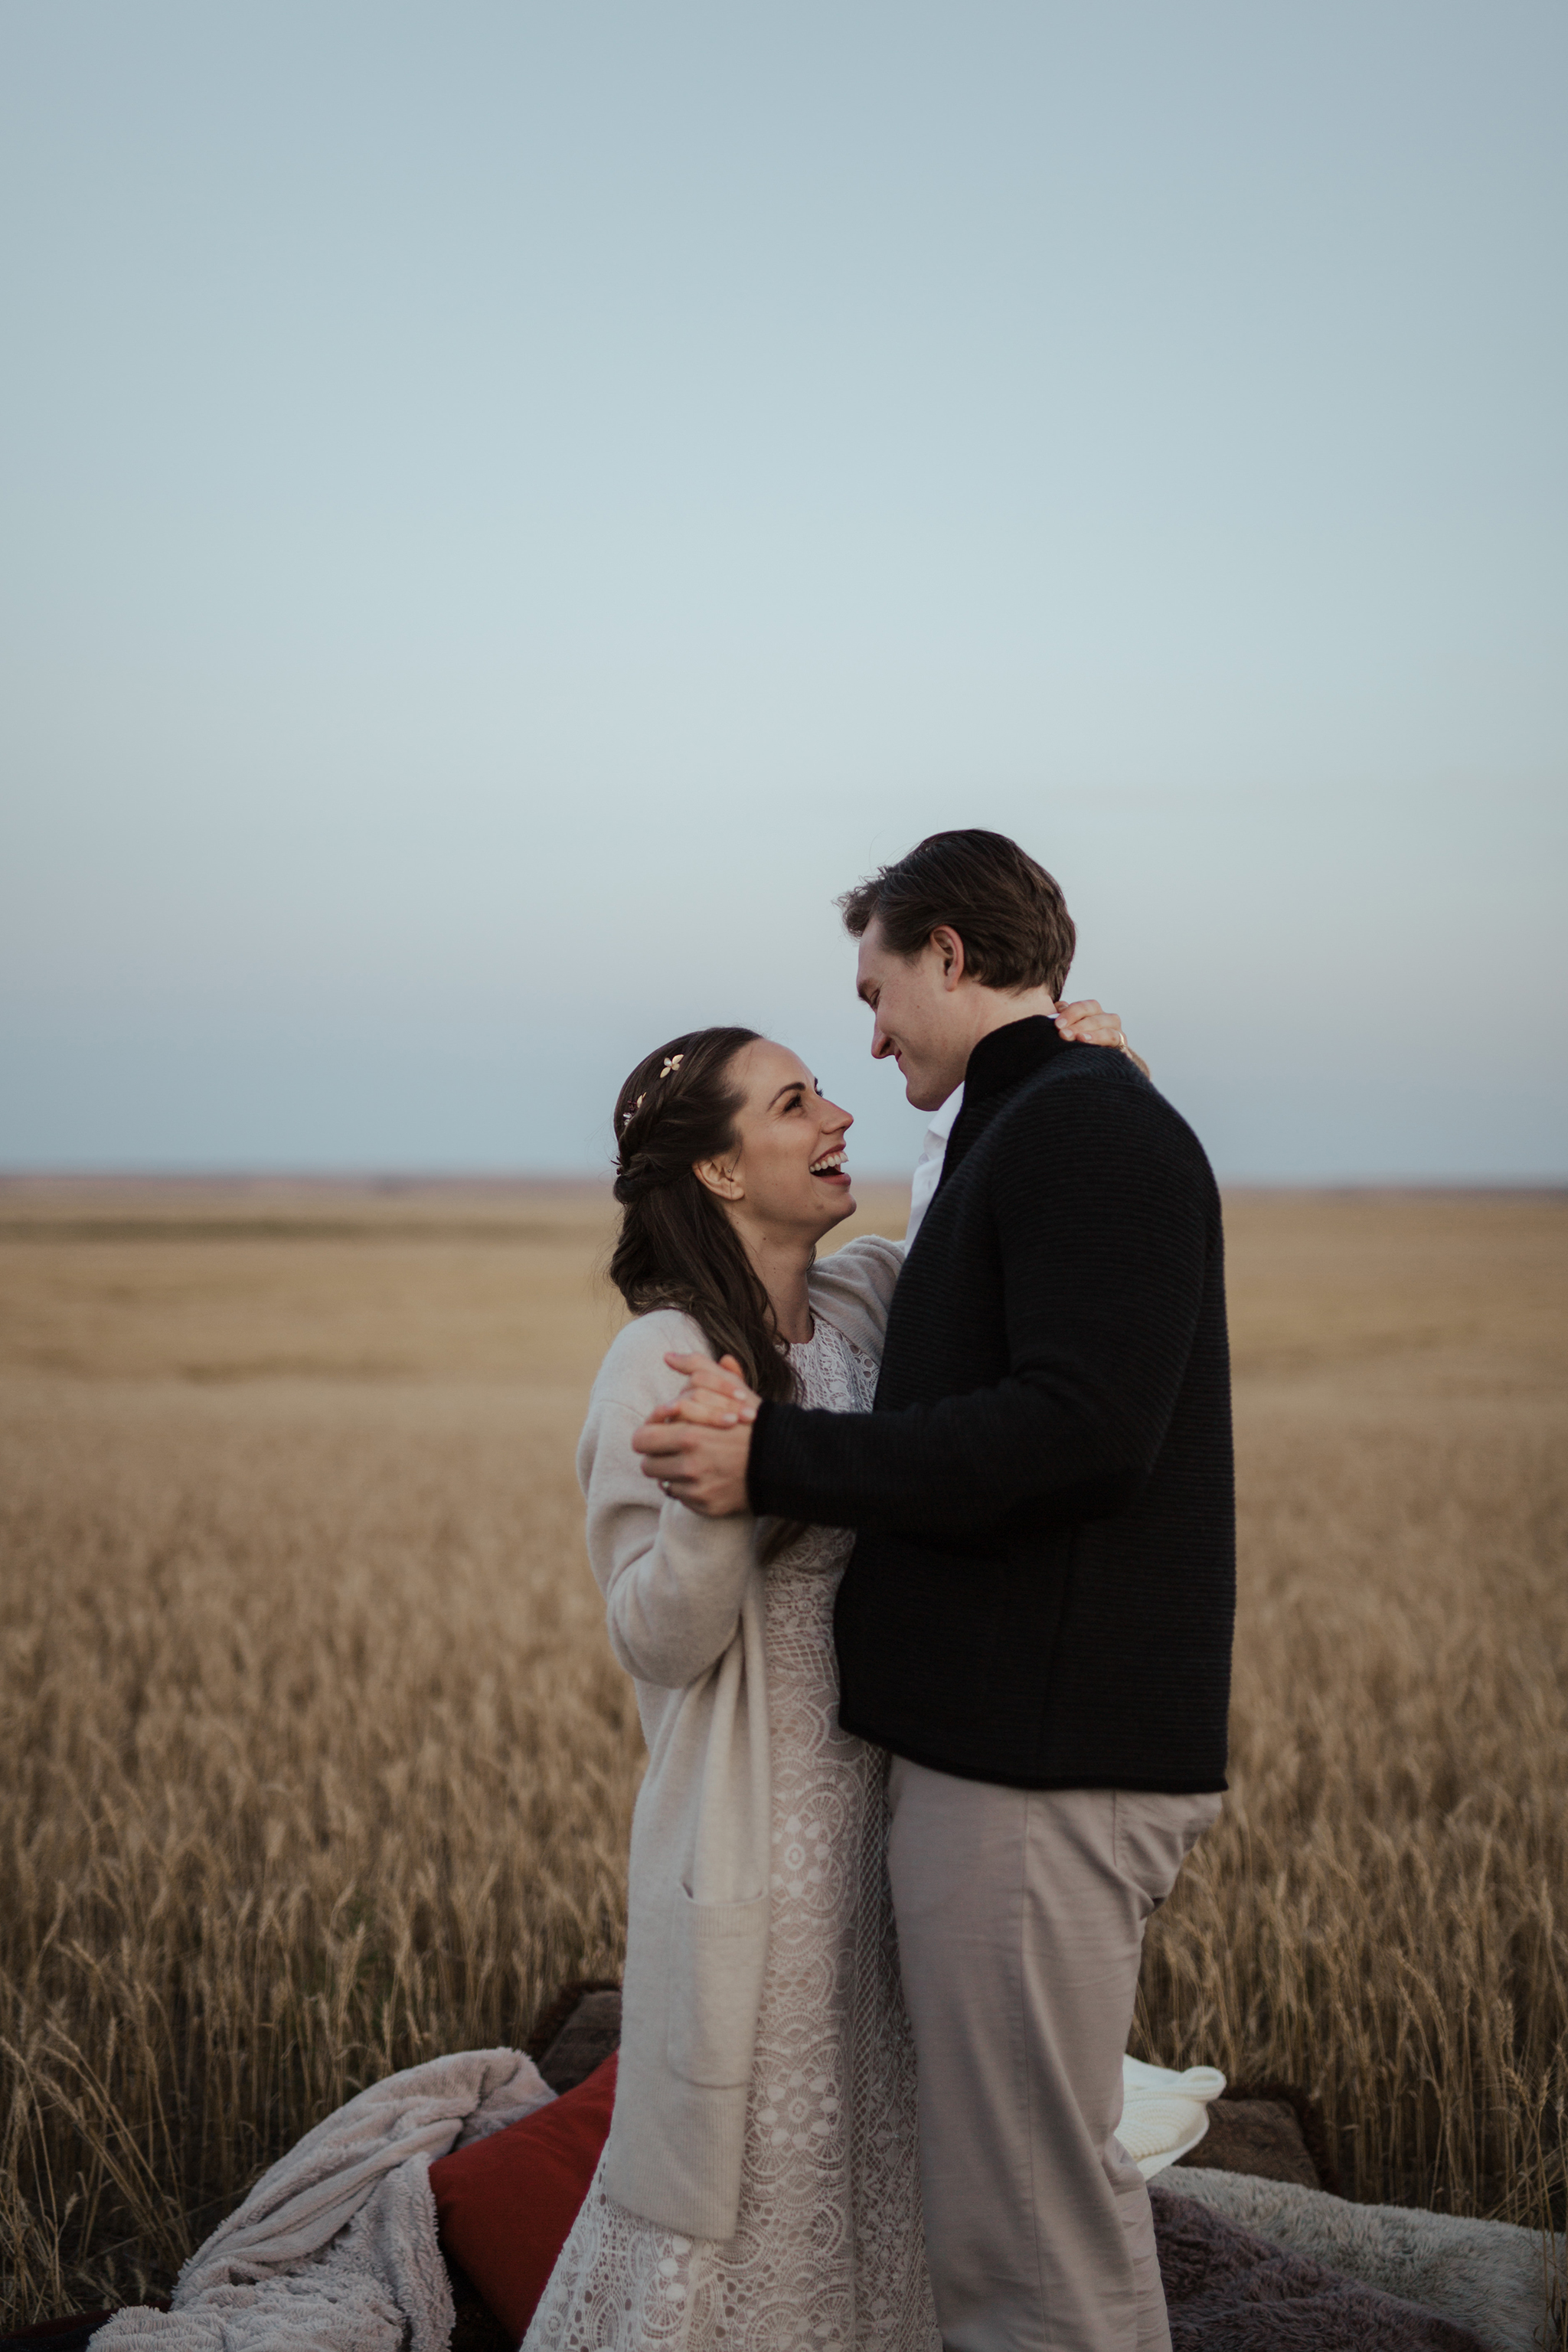 Becca and Reid's Countryside Vow Renewal // Styled Inspiration outside of Calgary, Alberta - Bronte Bride